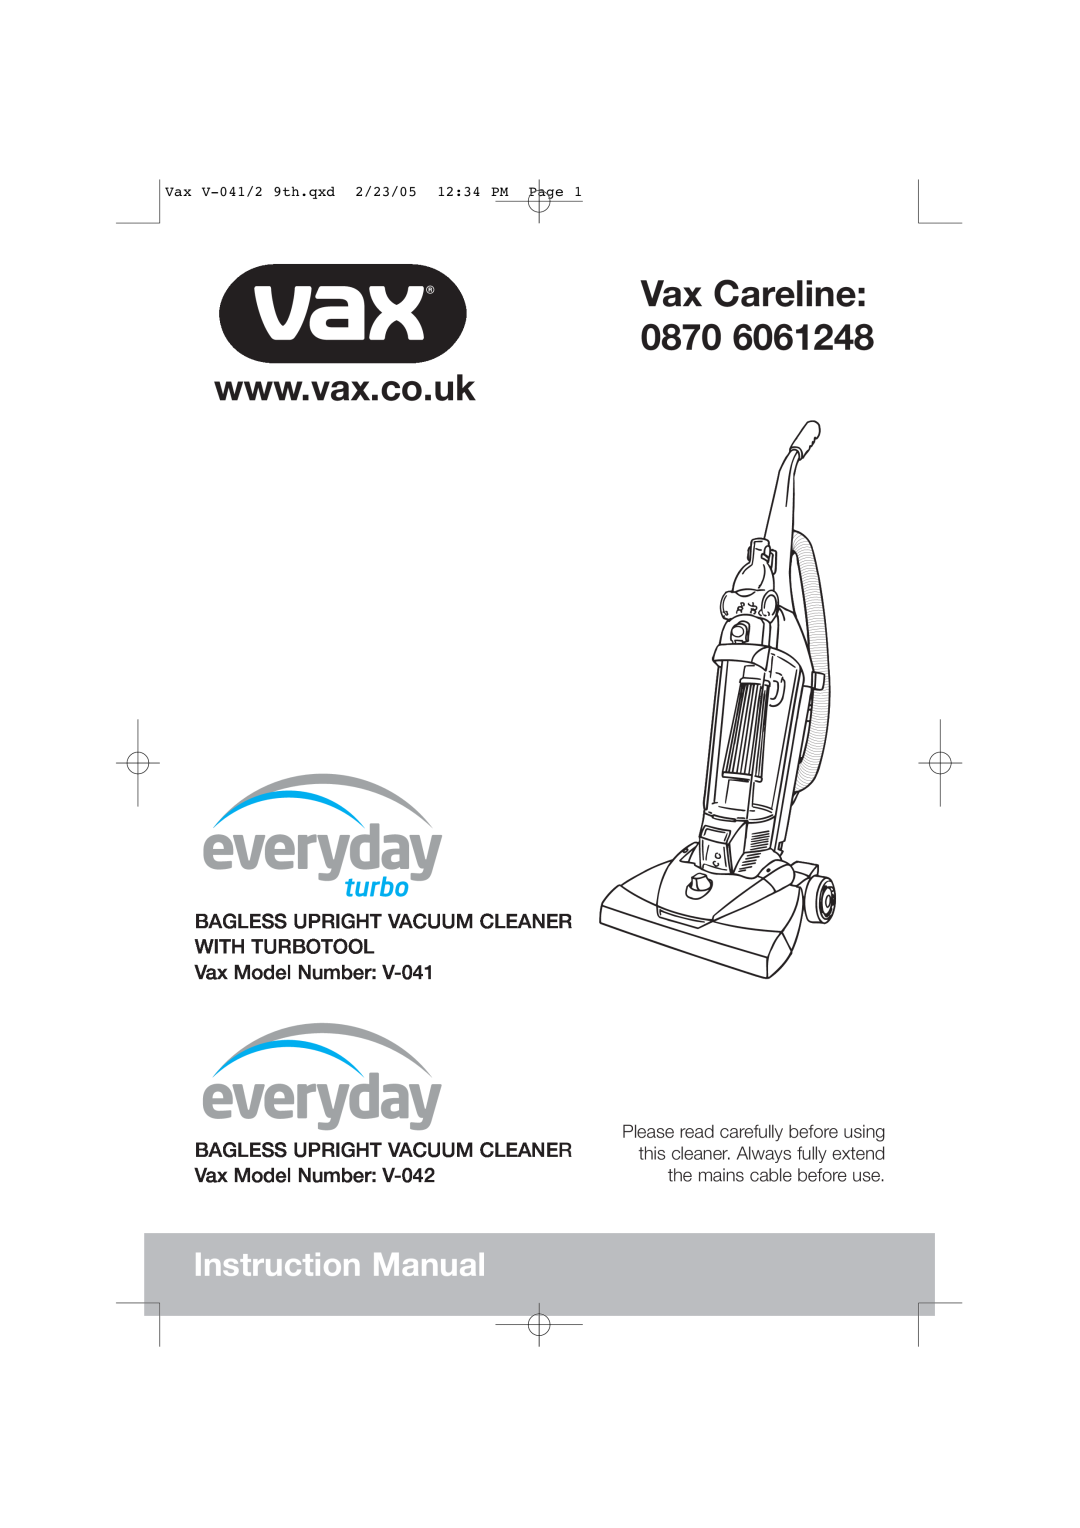 Vax V-042 instruction manual Vax V-041/29th.qxd 2/23/05 12 34 PM Page, Bagless Upright Vacuum Cleaner With Turbotool 